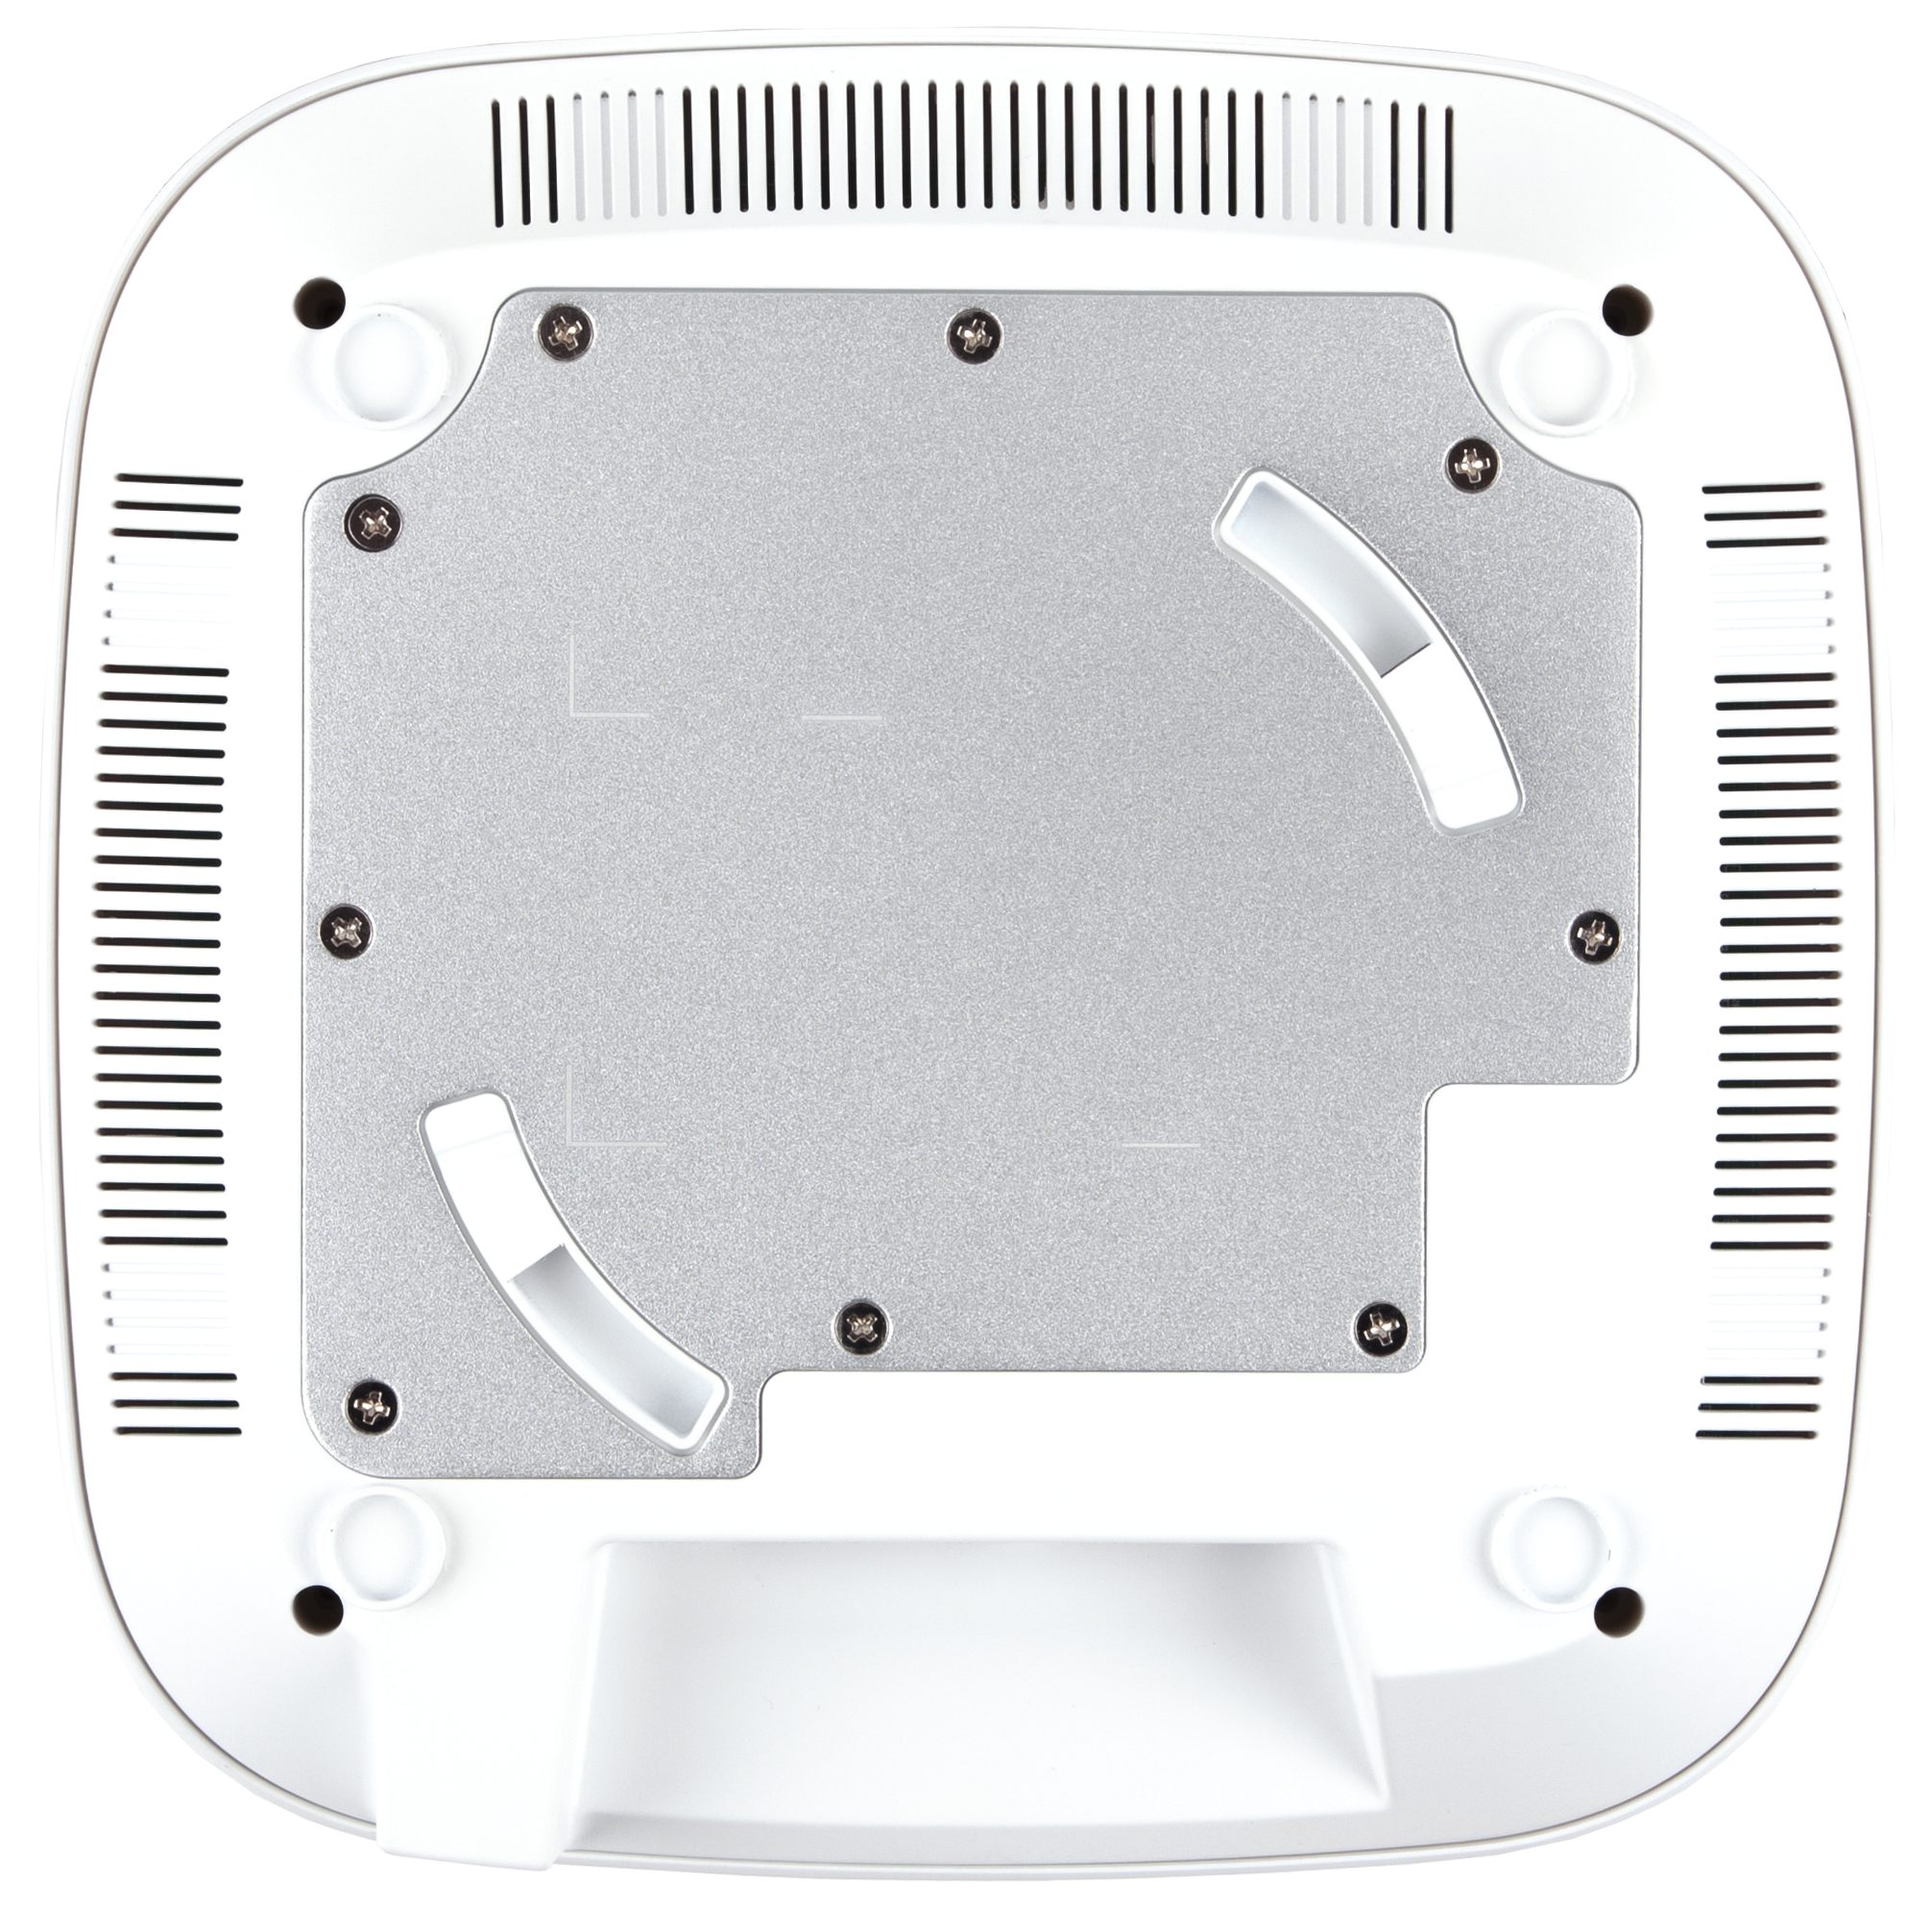 DAP-X2850 AX3600 Wi-Fi 6 Dual-Band PoE Access Point - back view with mount.